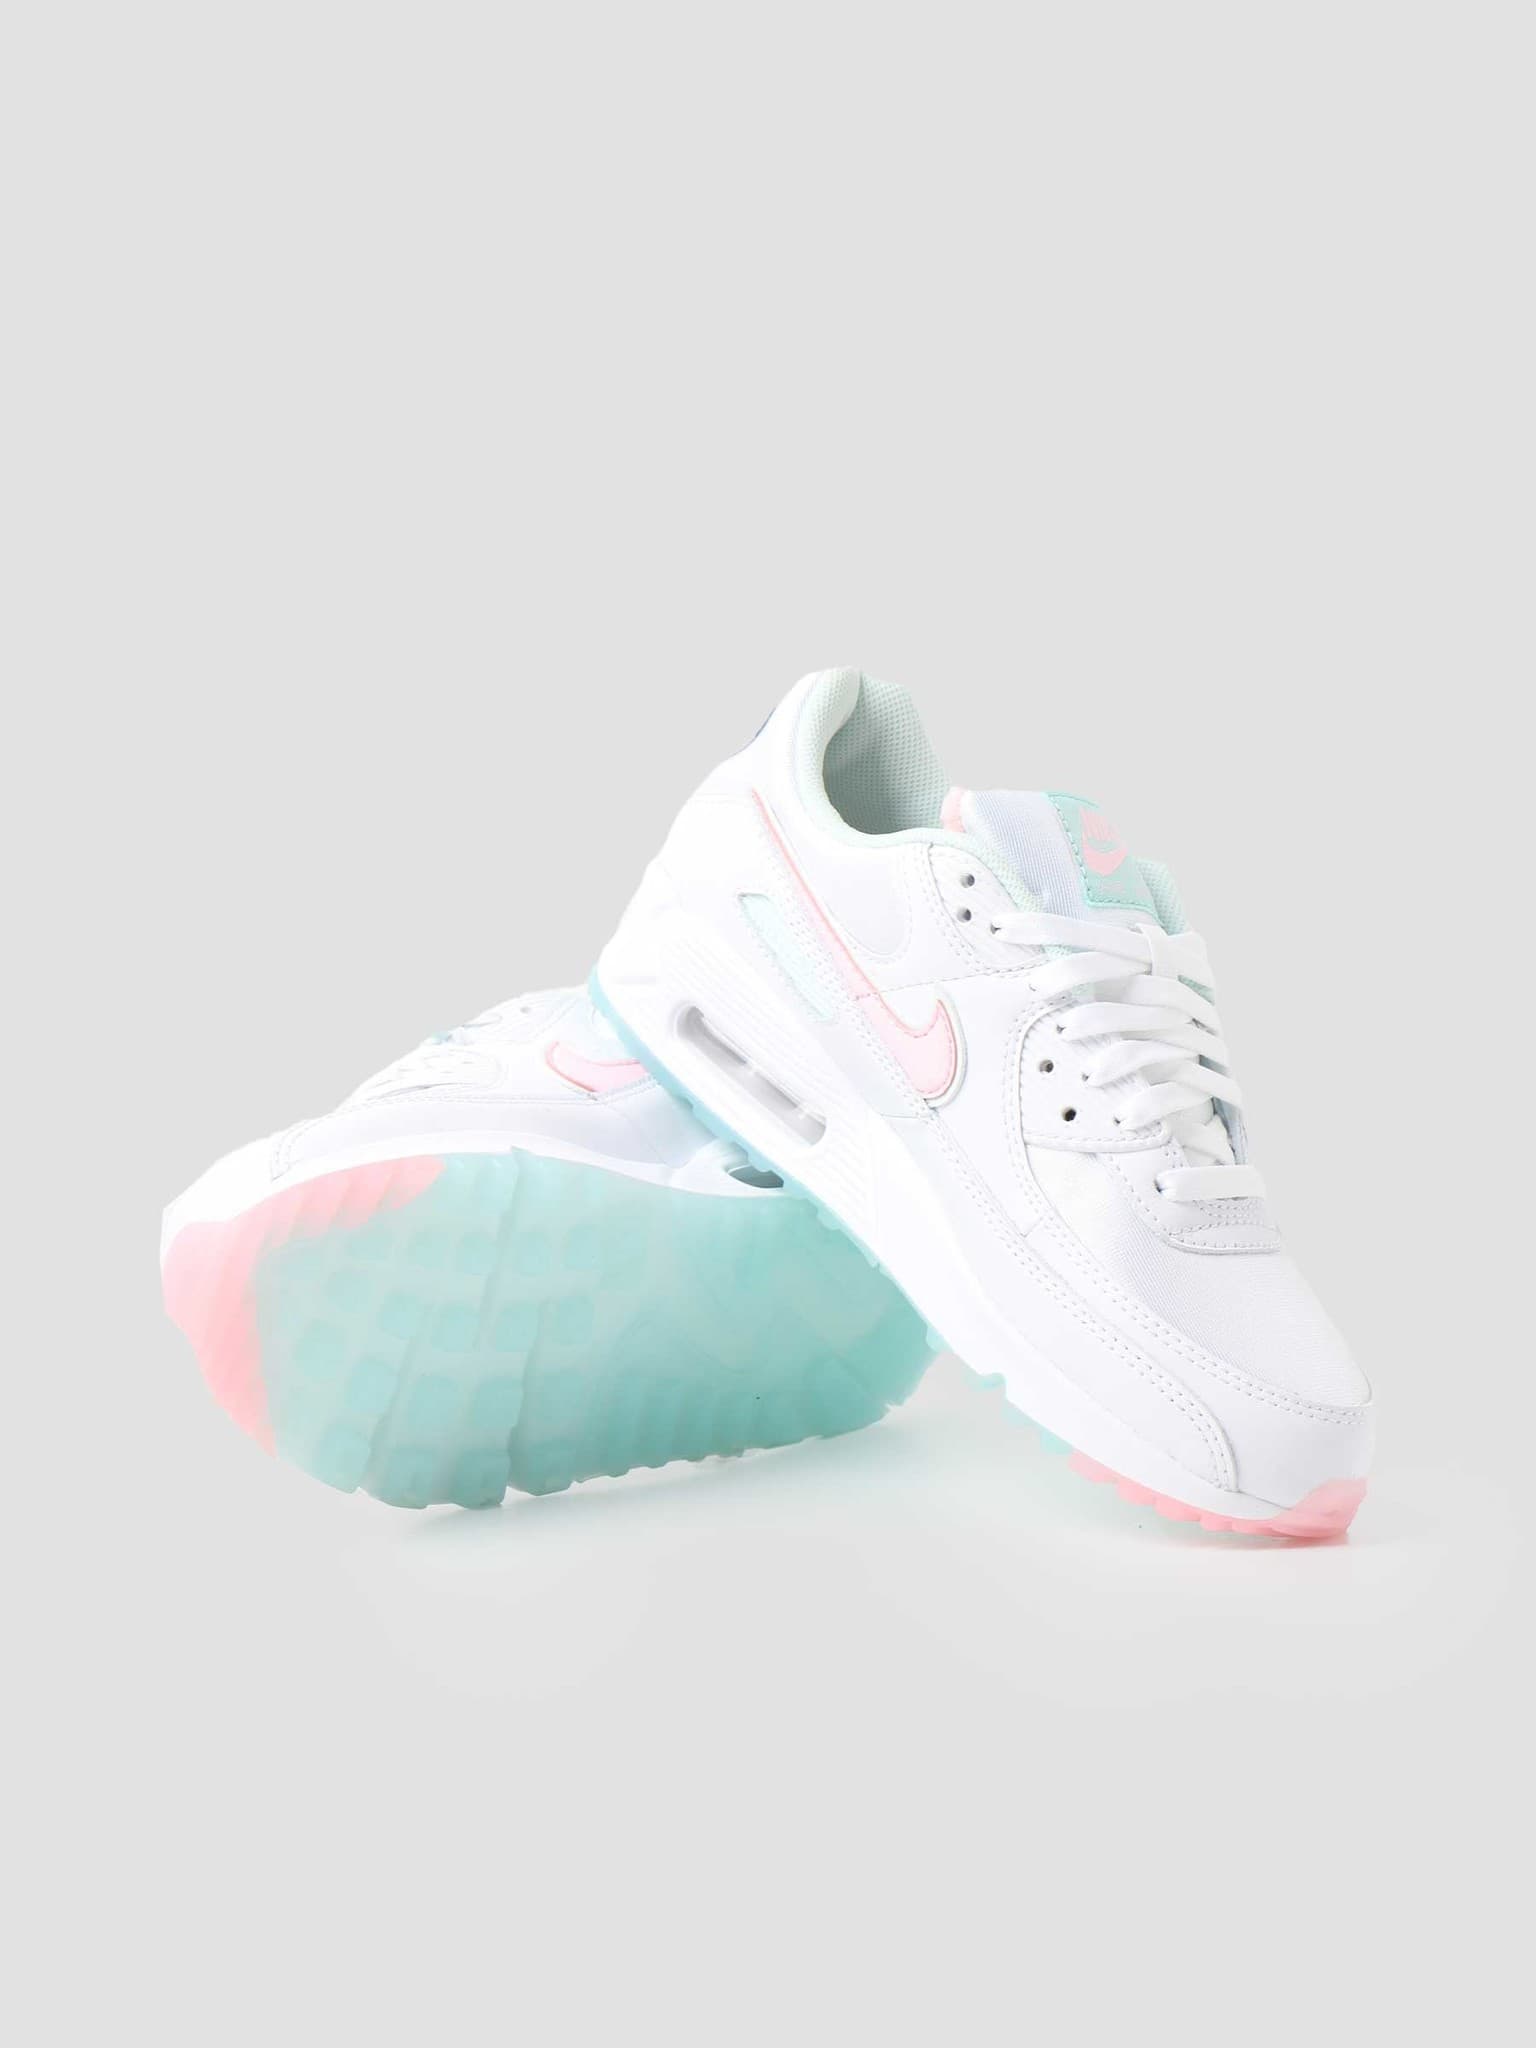 W Air Max 90 White Arctic Punch Barely Green DJ1493-100